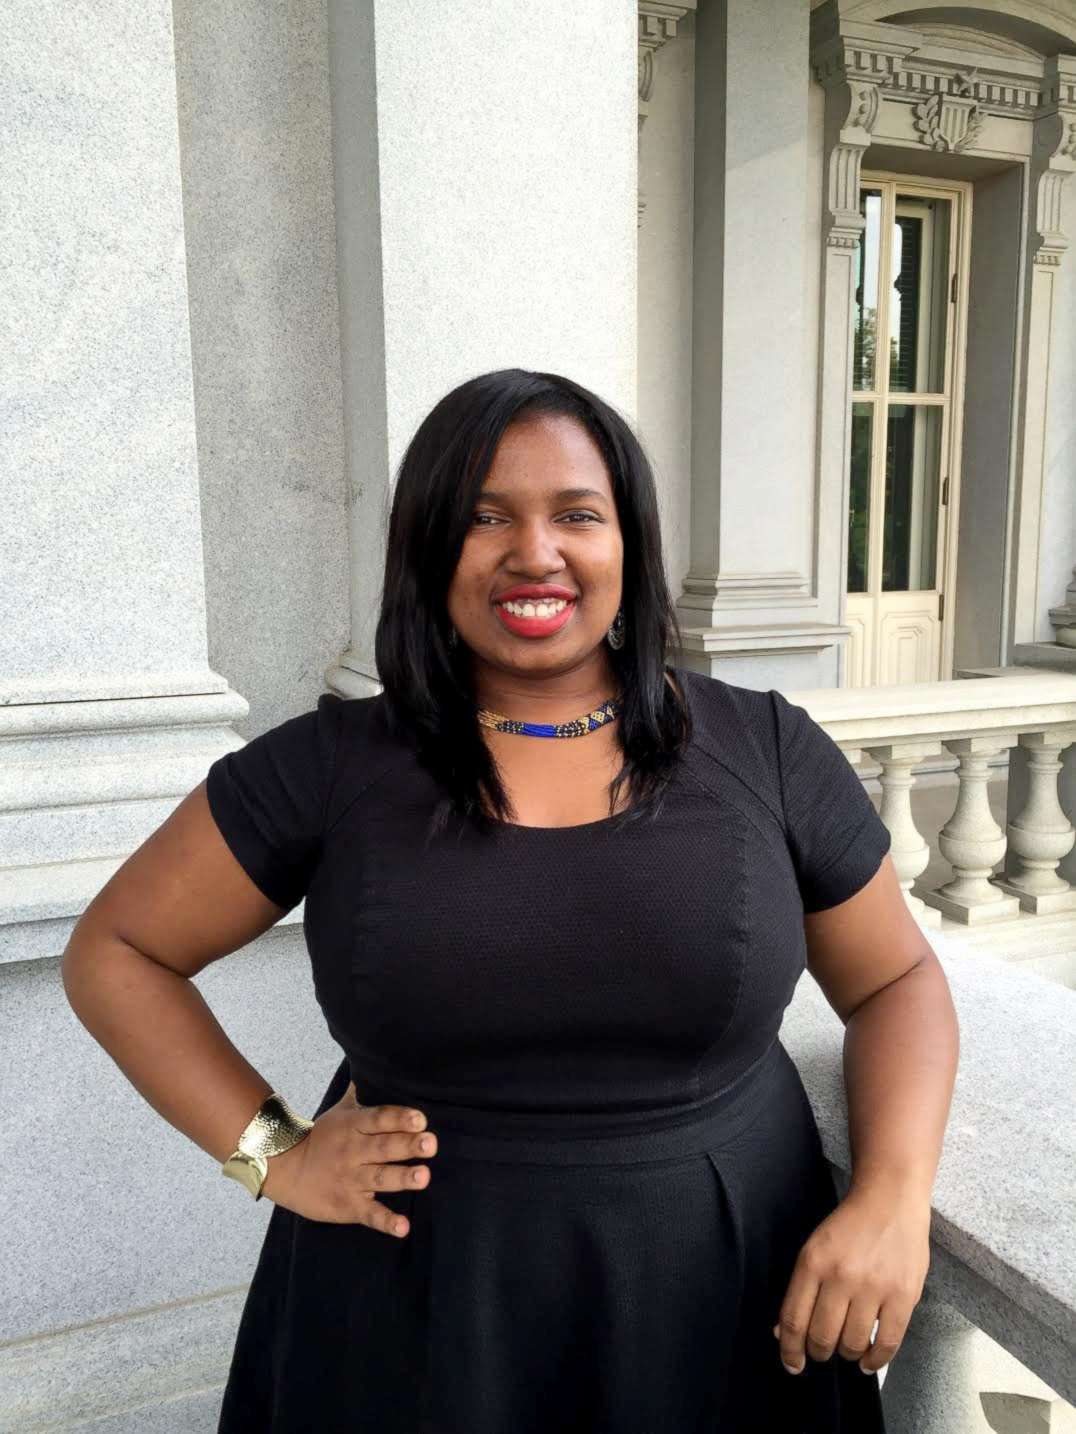 PHOTO: Shavonnia Corbin-Johnson, a 26-year-old former staffer for Democratic incumbent Sen. Bob Casey who worked under the Obama administration at the Office of Management and Budget. 